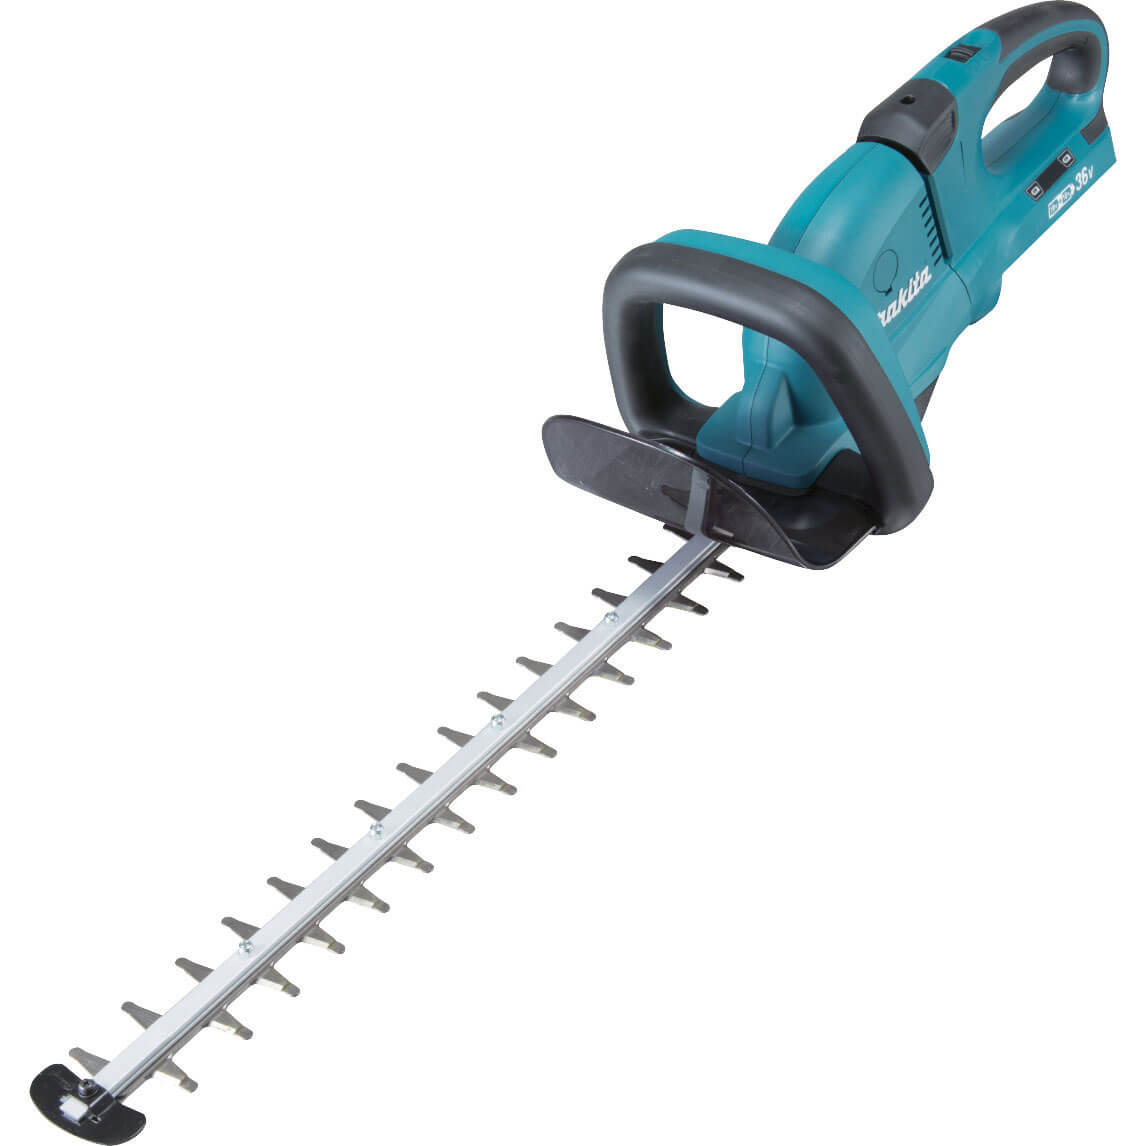 Makita DUH551Z 36v Cordless LXT Hedge Trimmer 550mm Blade Length without Battery or Charger  (Uses 2 x 18v Batteries)